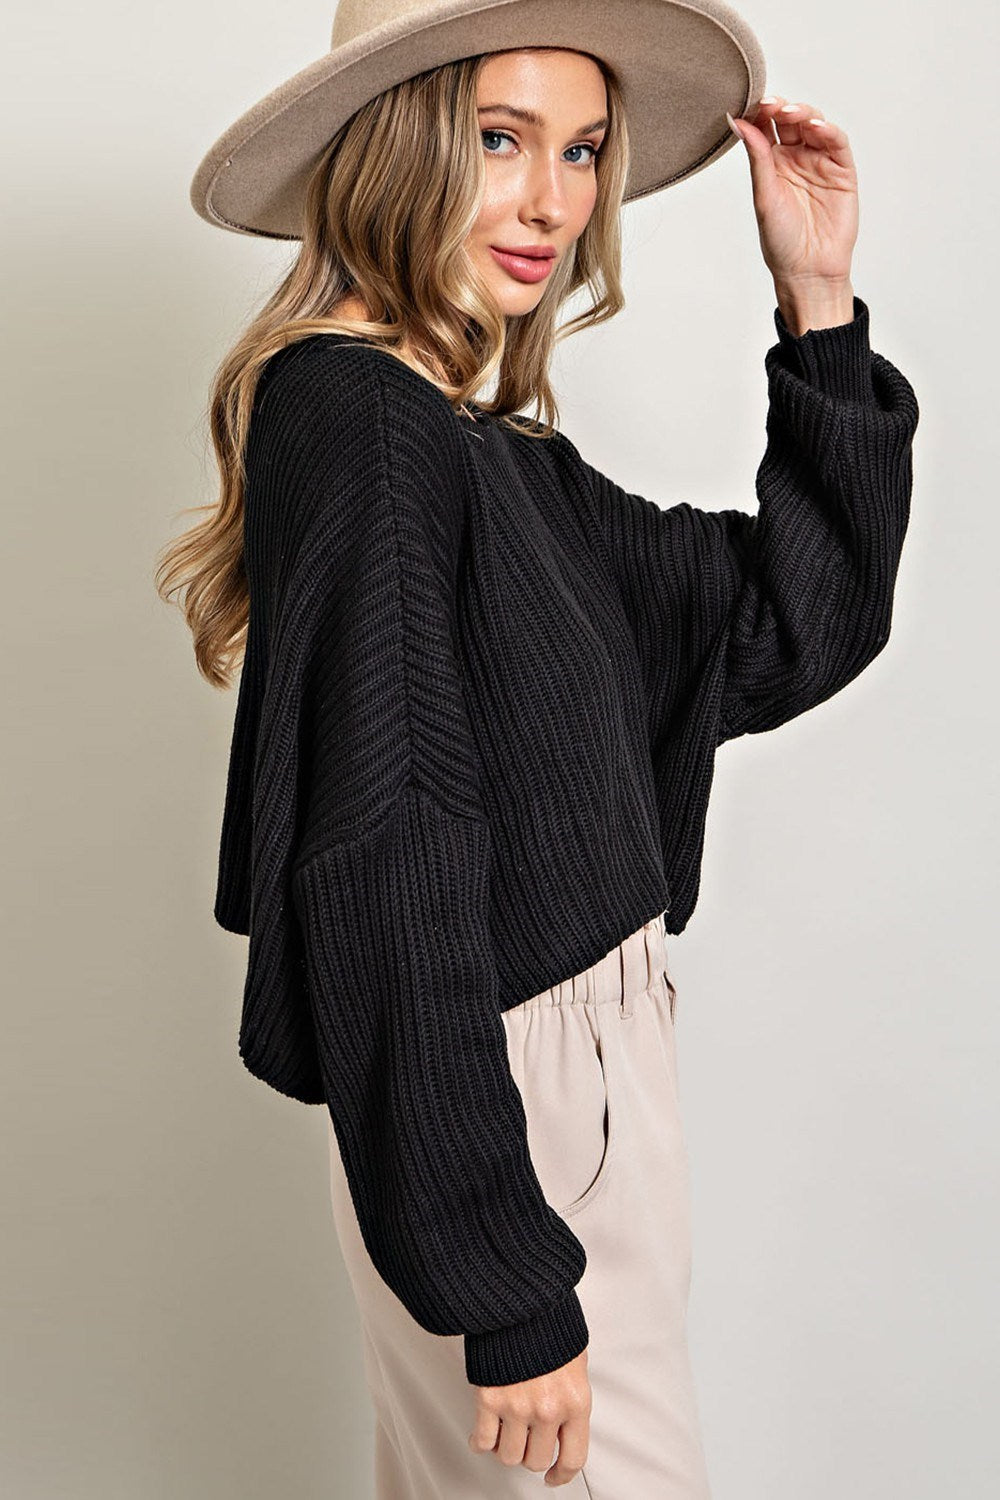 FINAL SALE Longing for The Weekend Cropped Knit Sweater